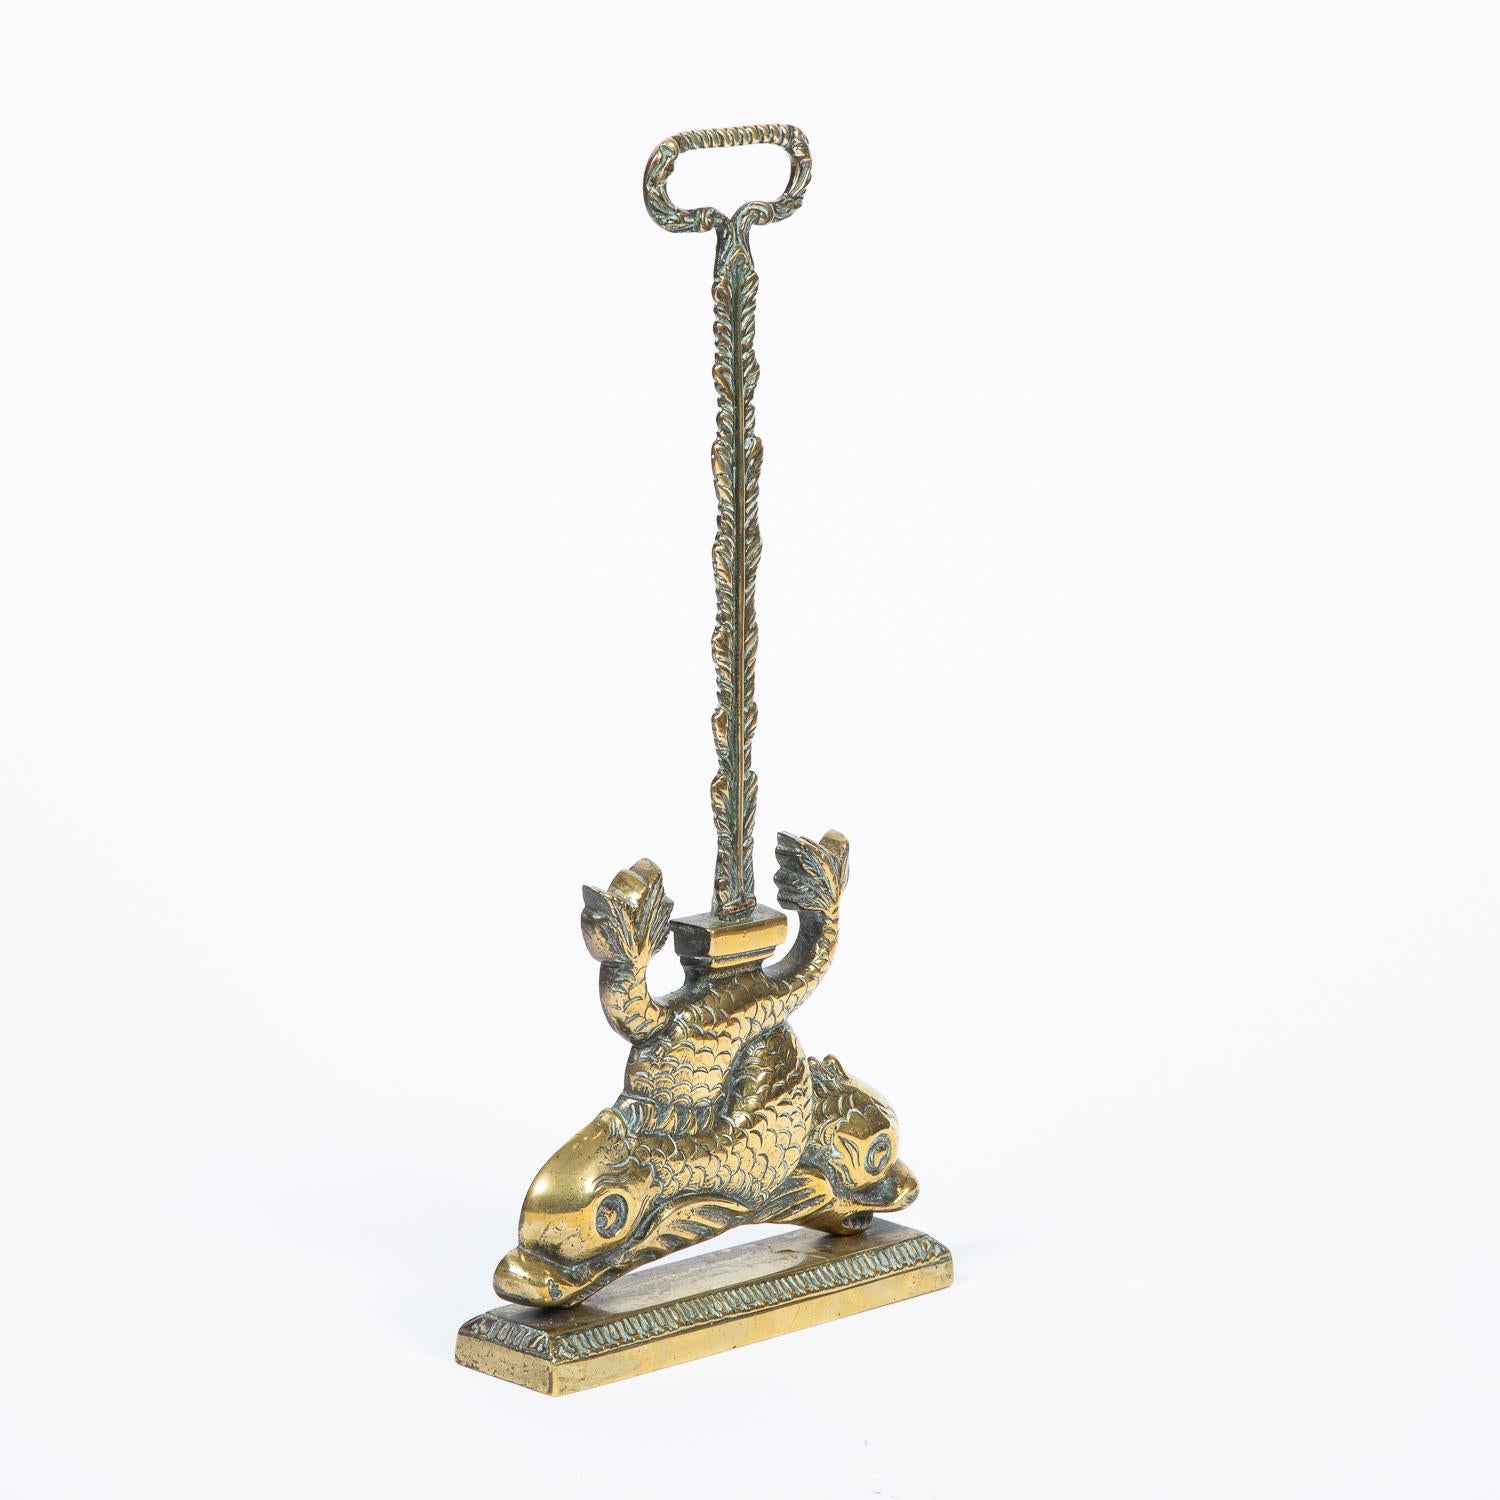 A brass door stop or door porter in the form of two intertwined dolphins, with a loop handle and iron weighted base.

Weight: 2.75 kg - 6 1/4 lbs
